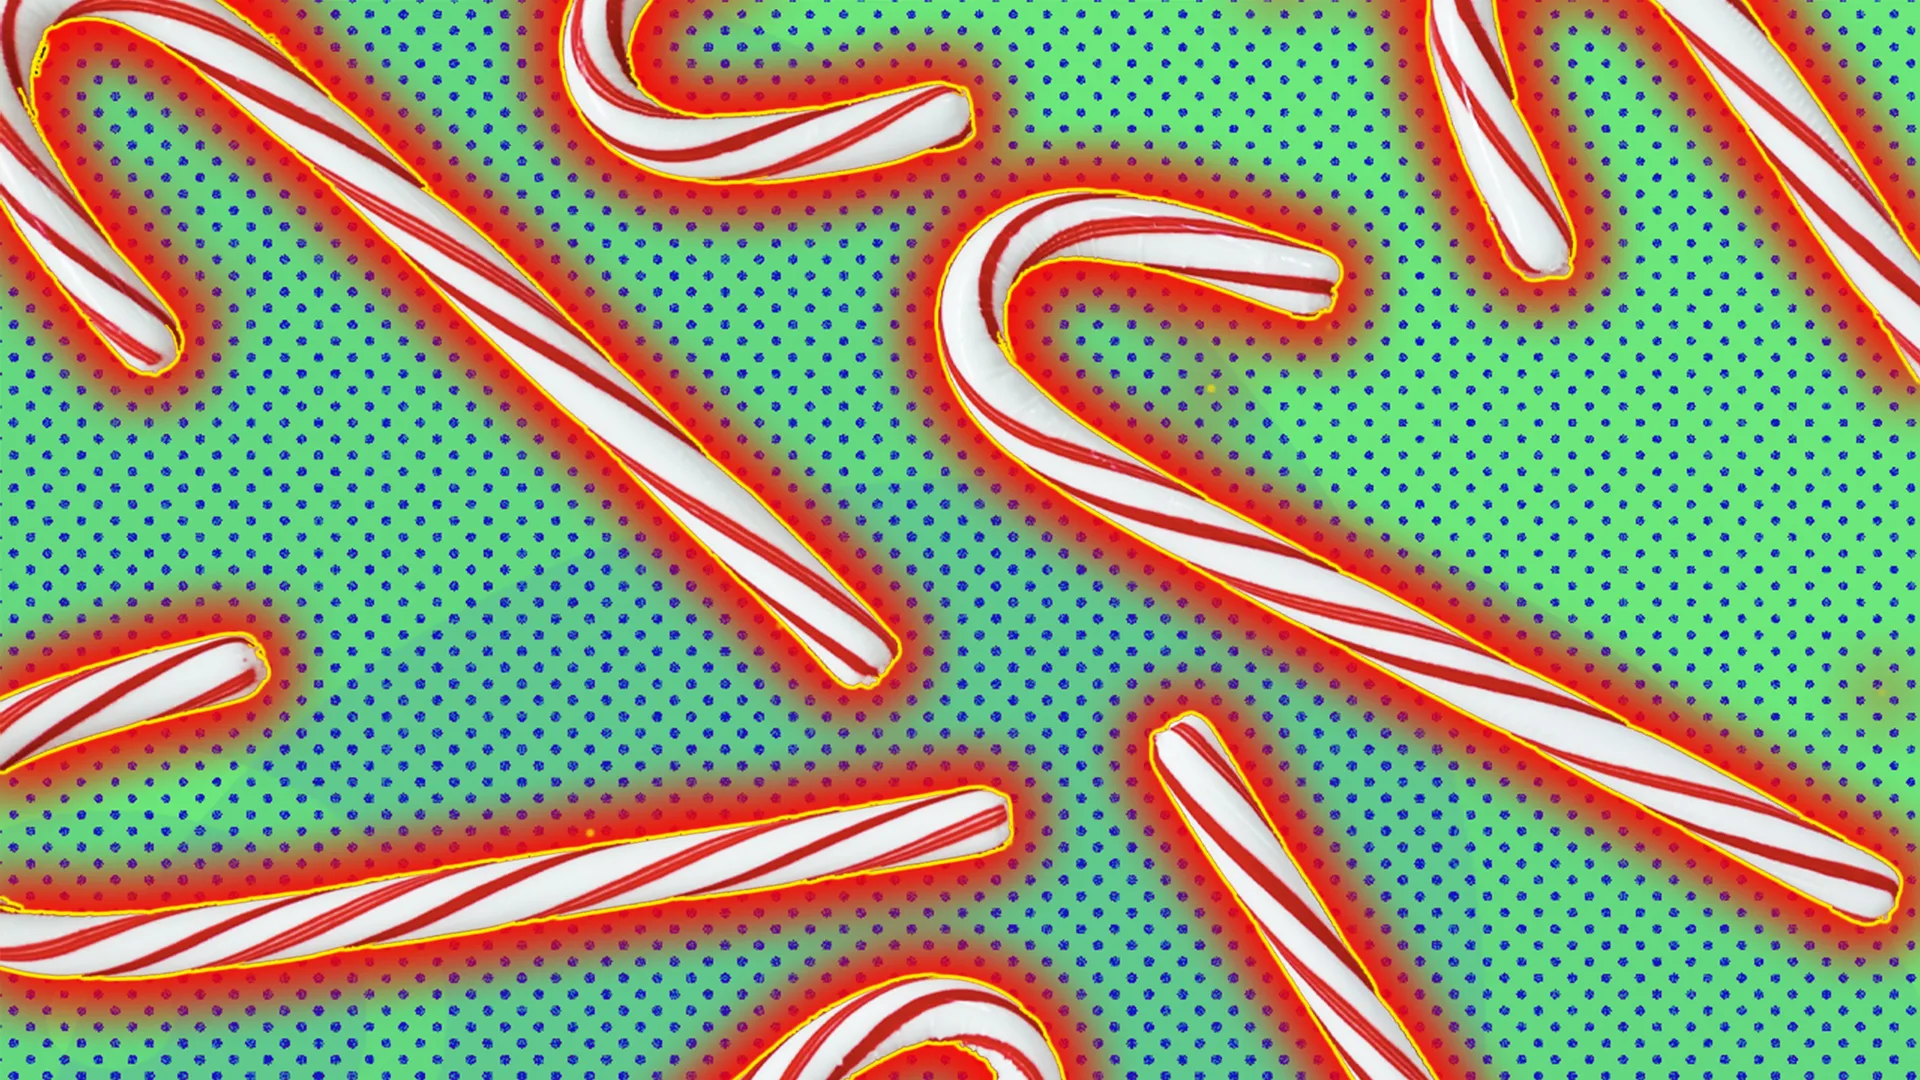 Multiple festive candy canes with the classic red and white stripes, outlined by red halo effect on green and blue-background.